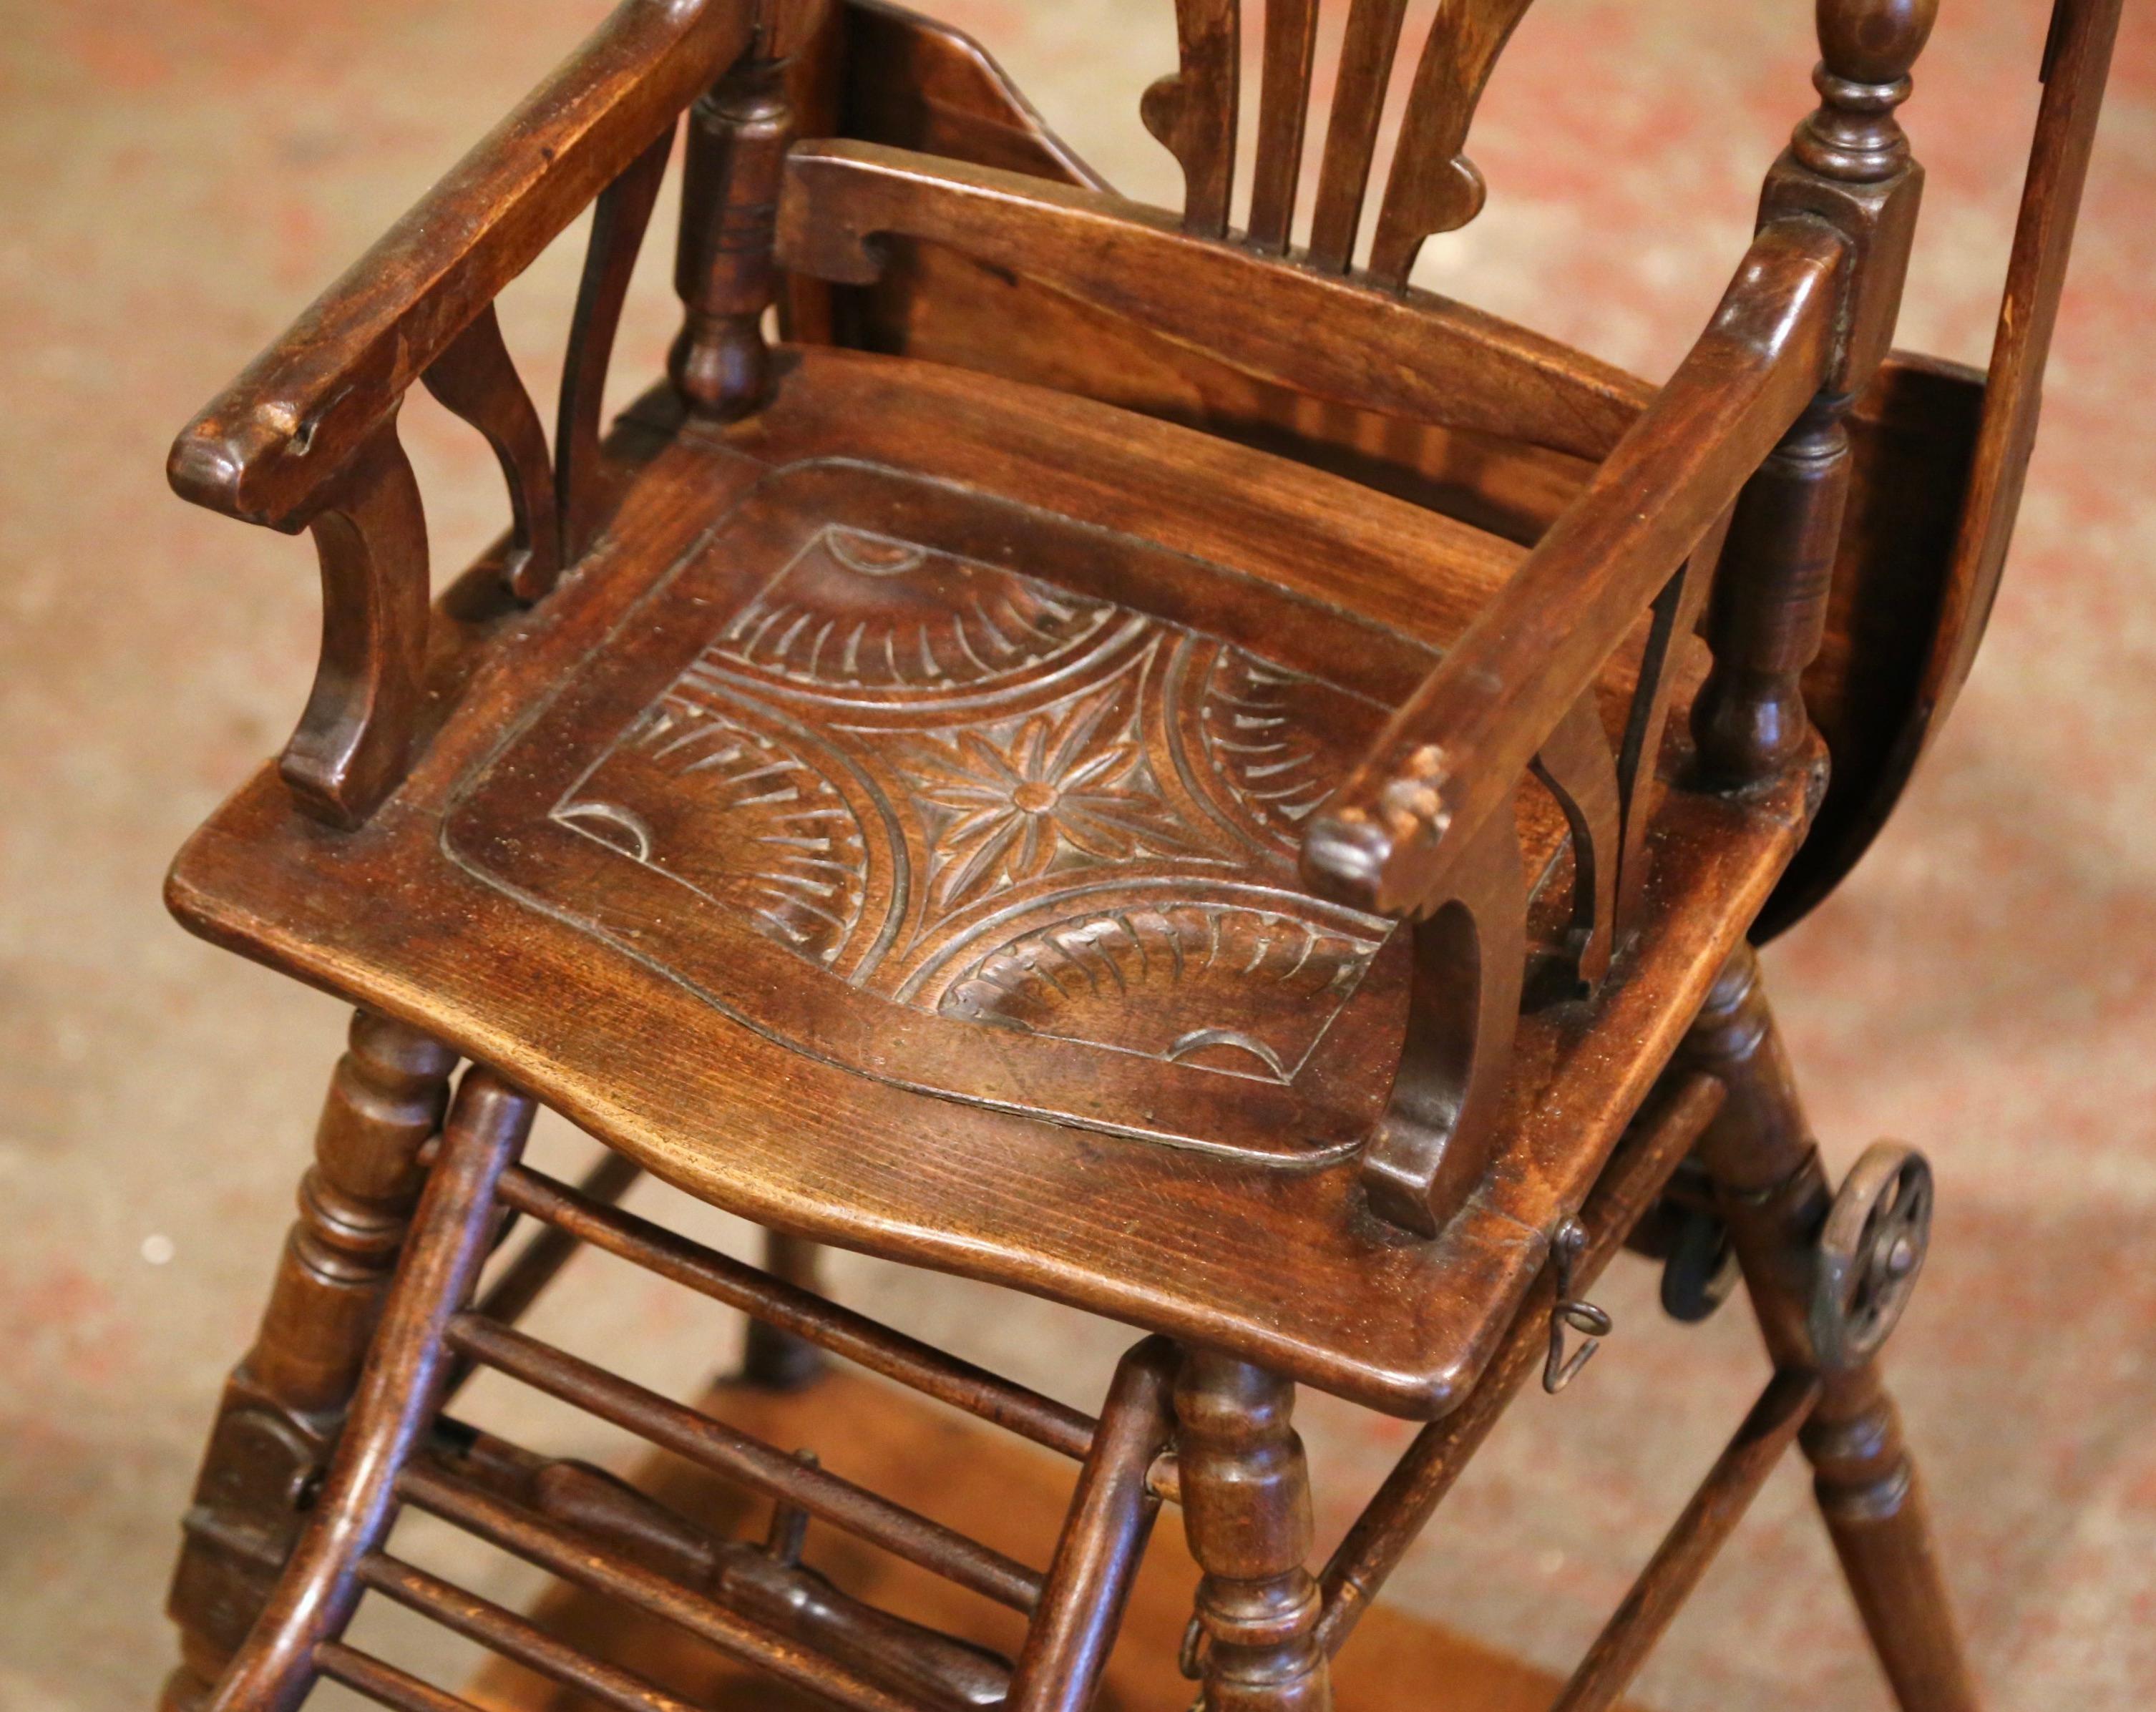 Hand-Crafted Mid-20th Century French Carved Folding Up and Down Child High Chair on Wheels